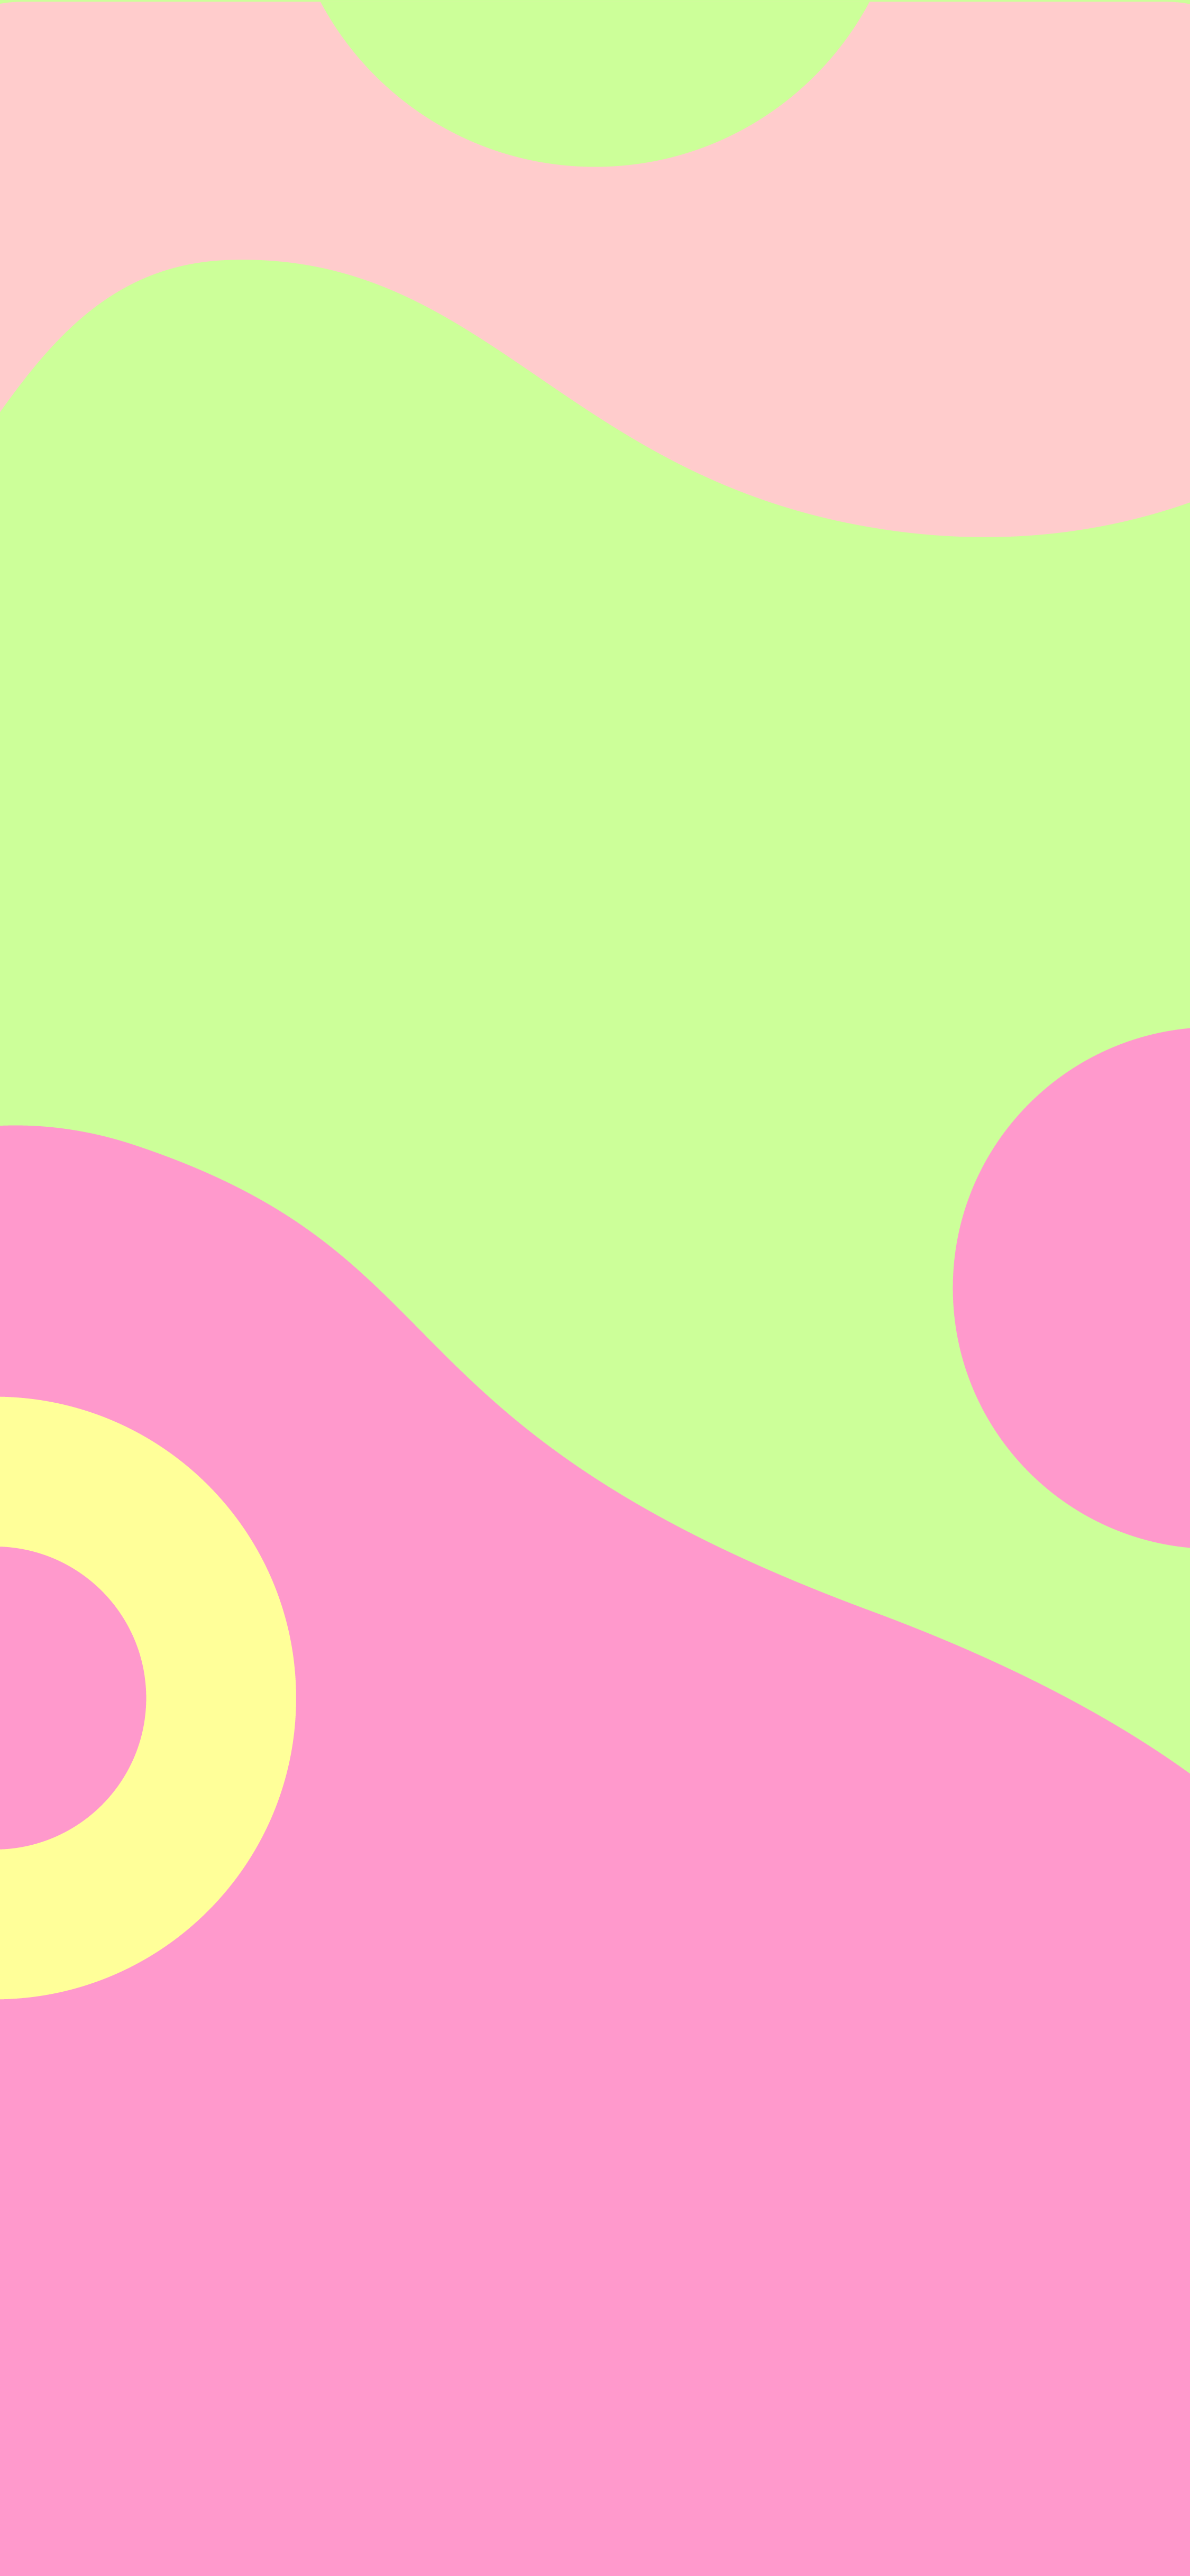 A pink and green abstract image with flowing shapes. - Clean